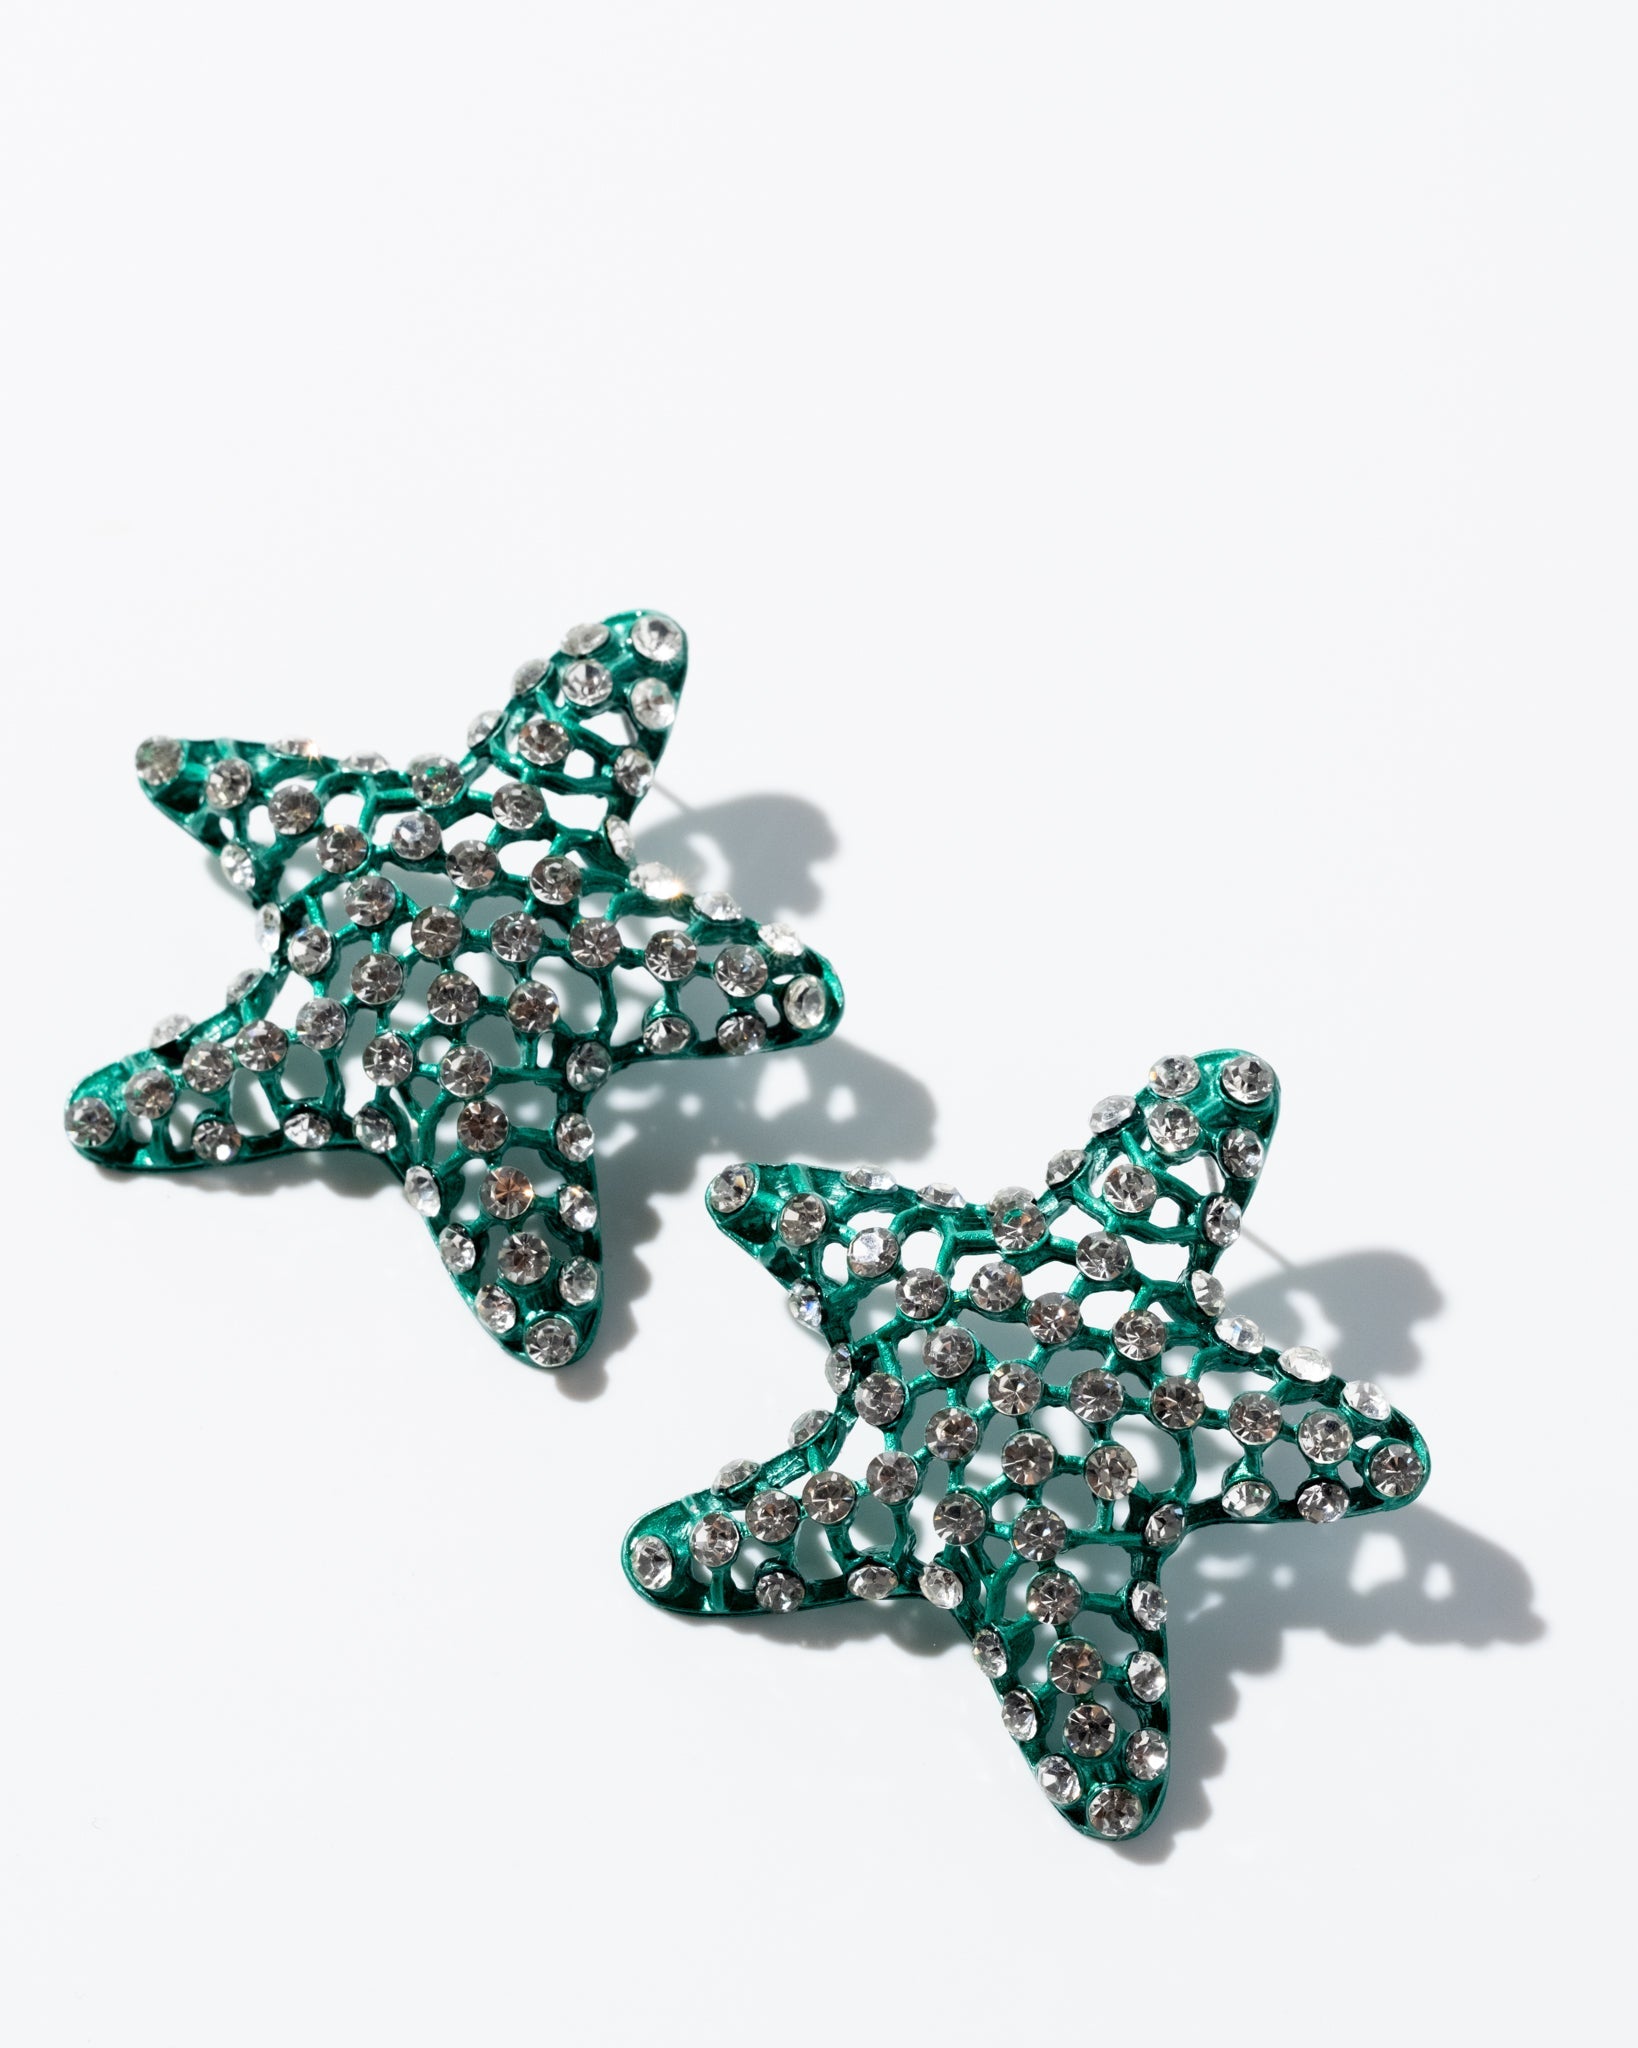 The Bright Star Earrings